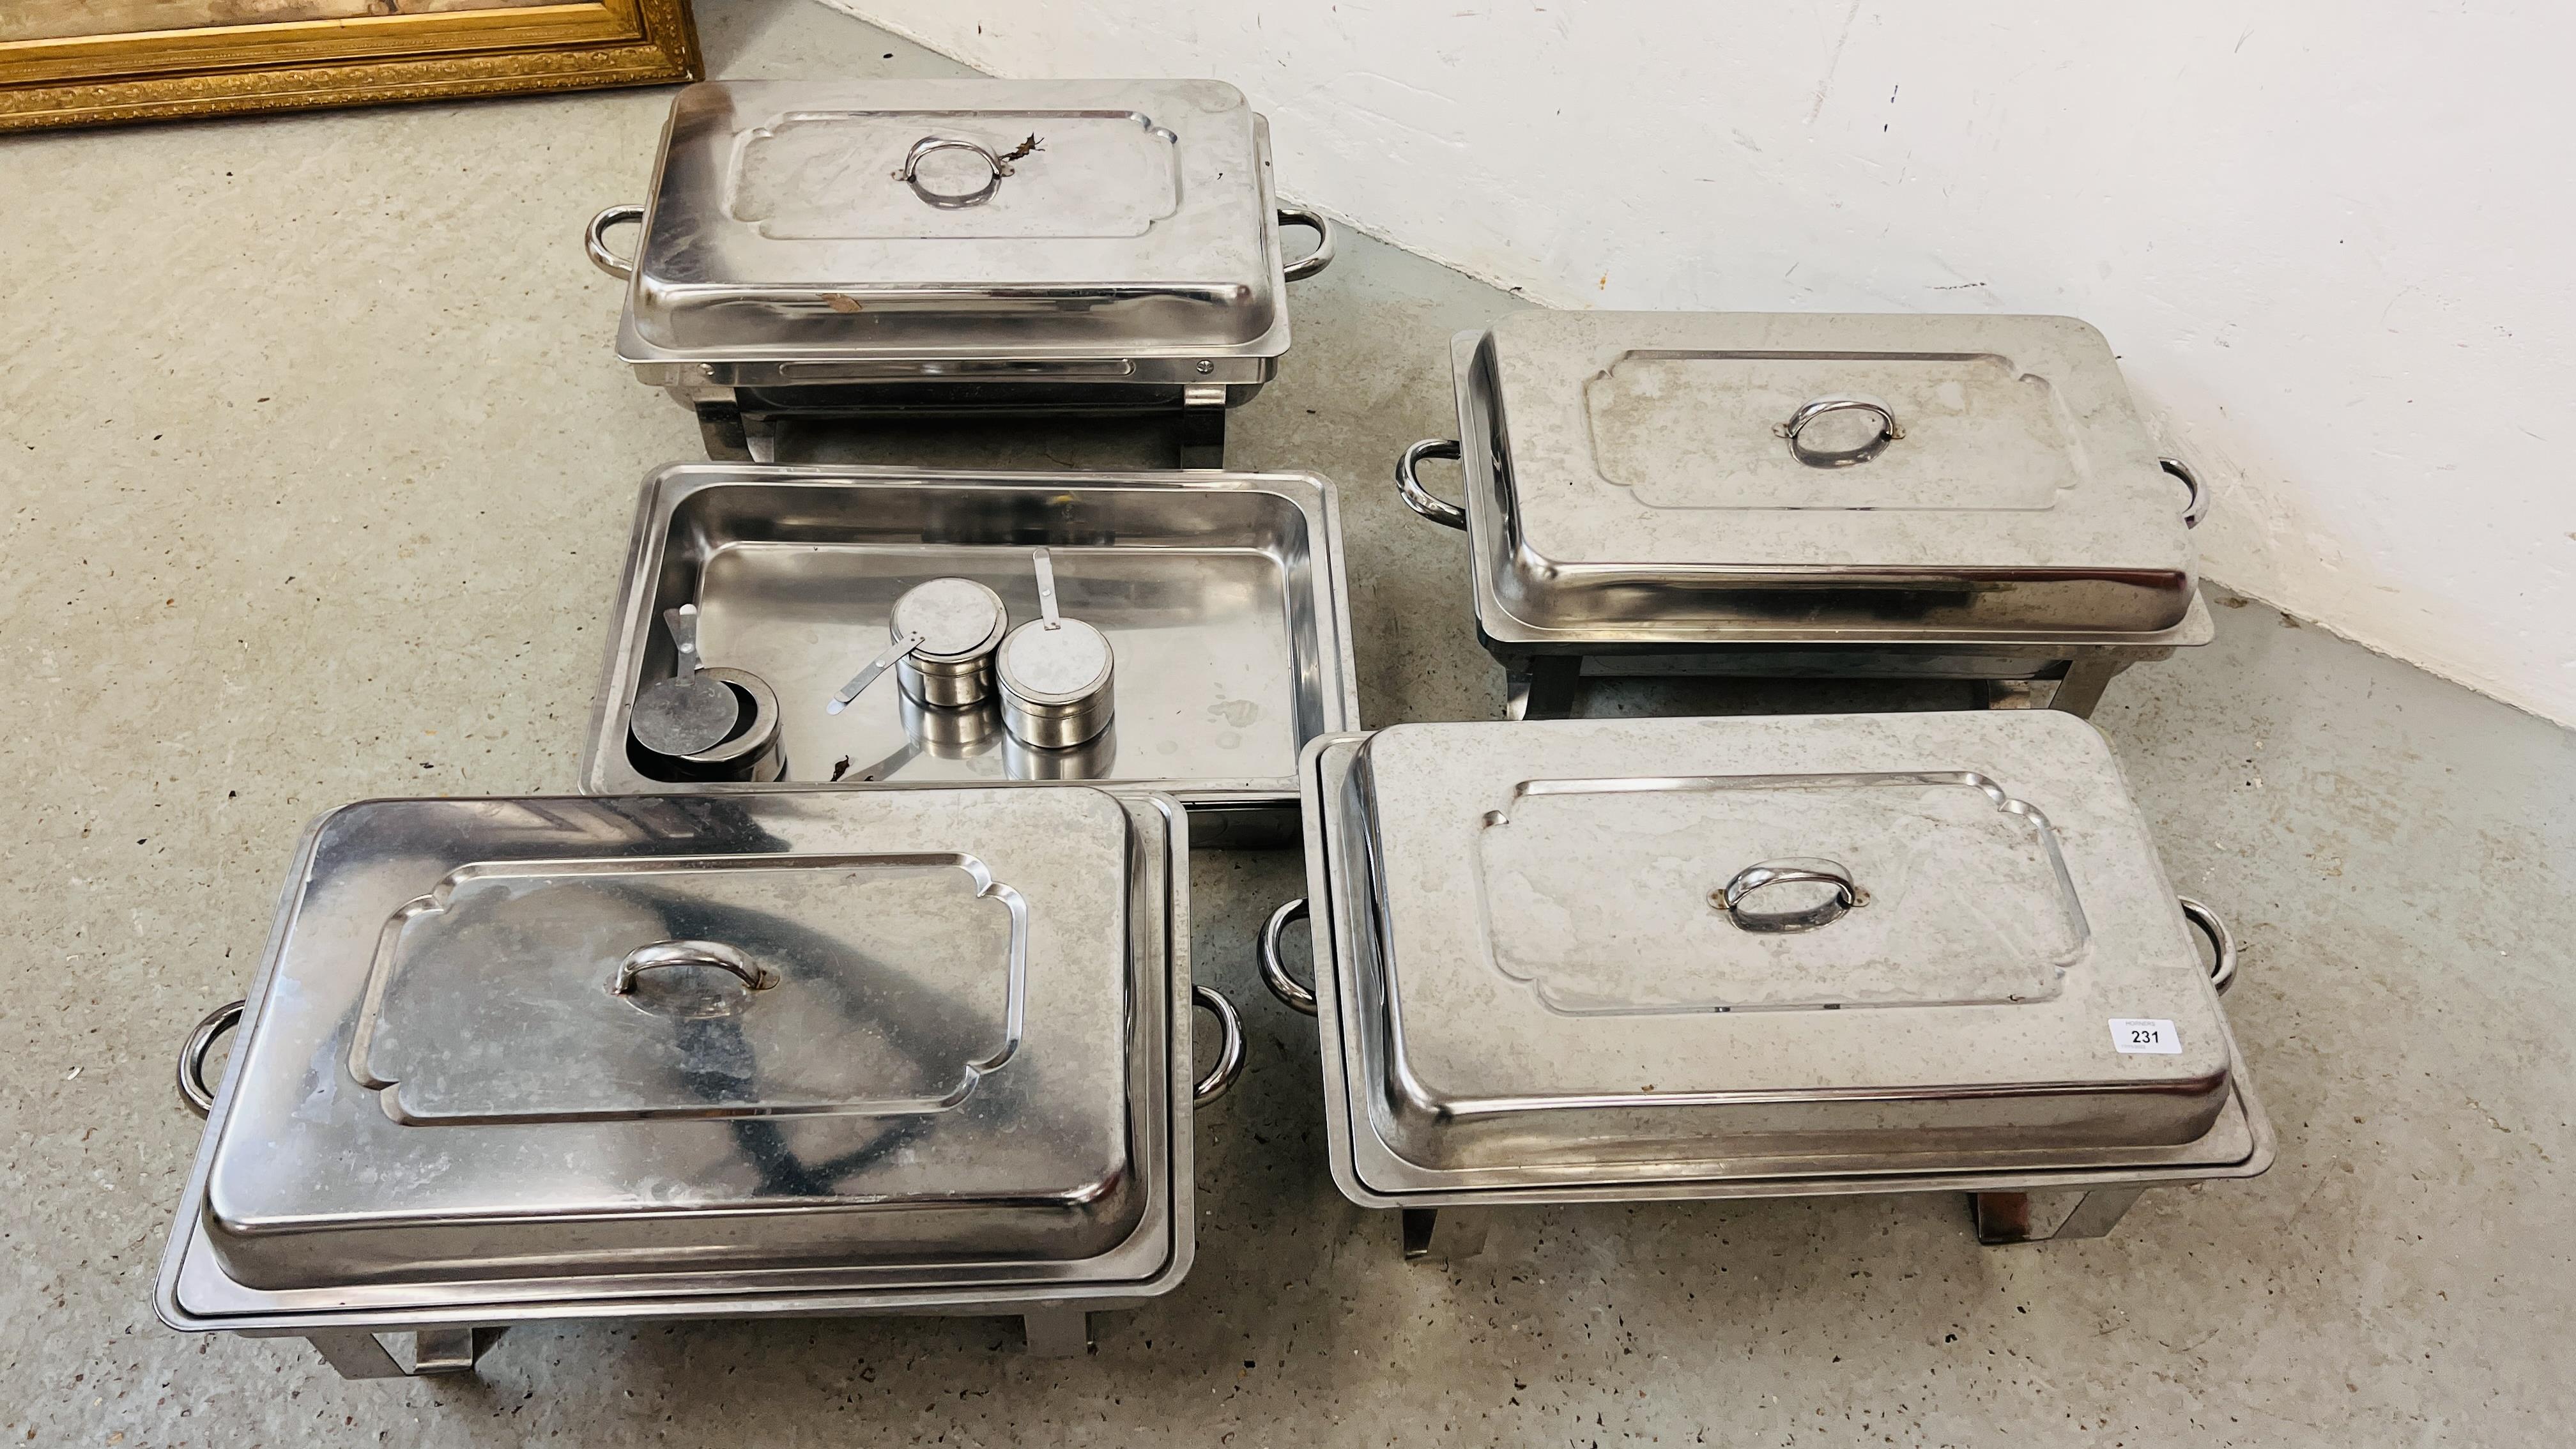 A GROUP OF FOUR STAINLESS STEEL CHAFING DISHES ALONG WITH A FURTHER FOUR TRAYS AND THREE BURNERS.